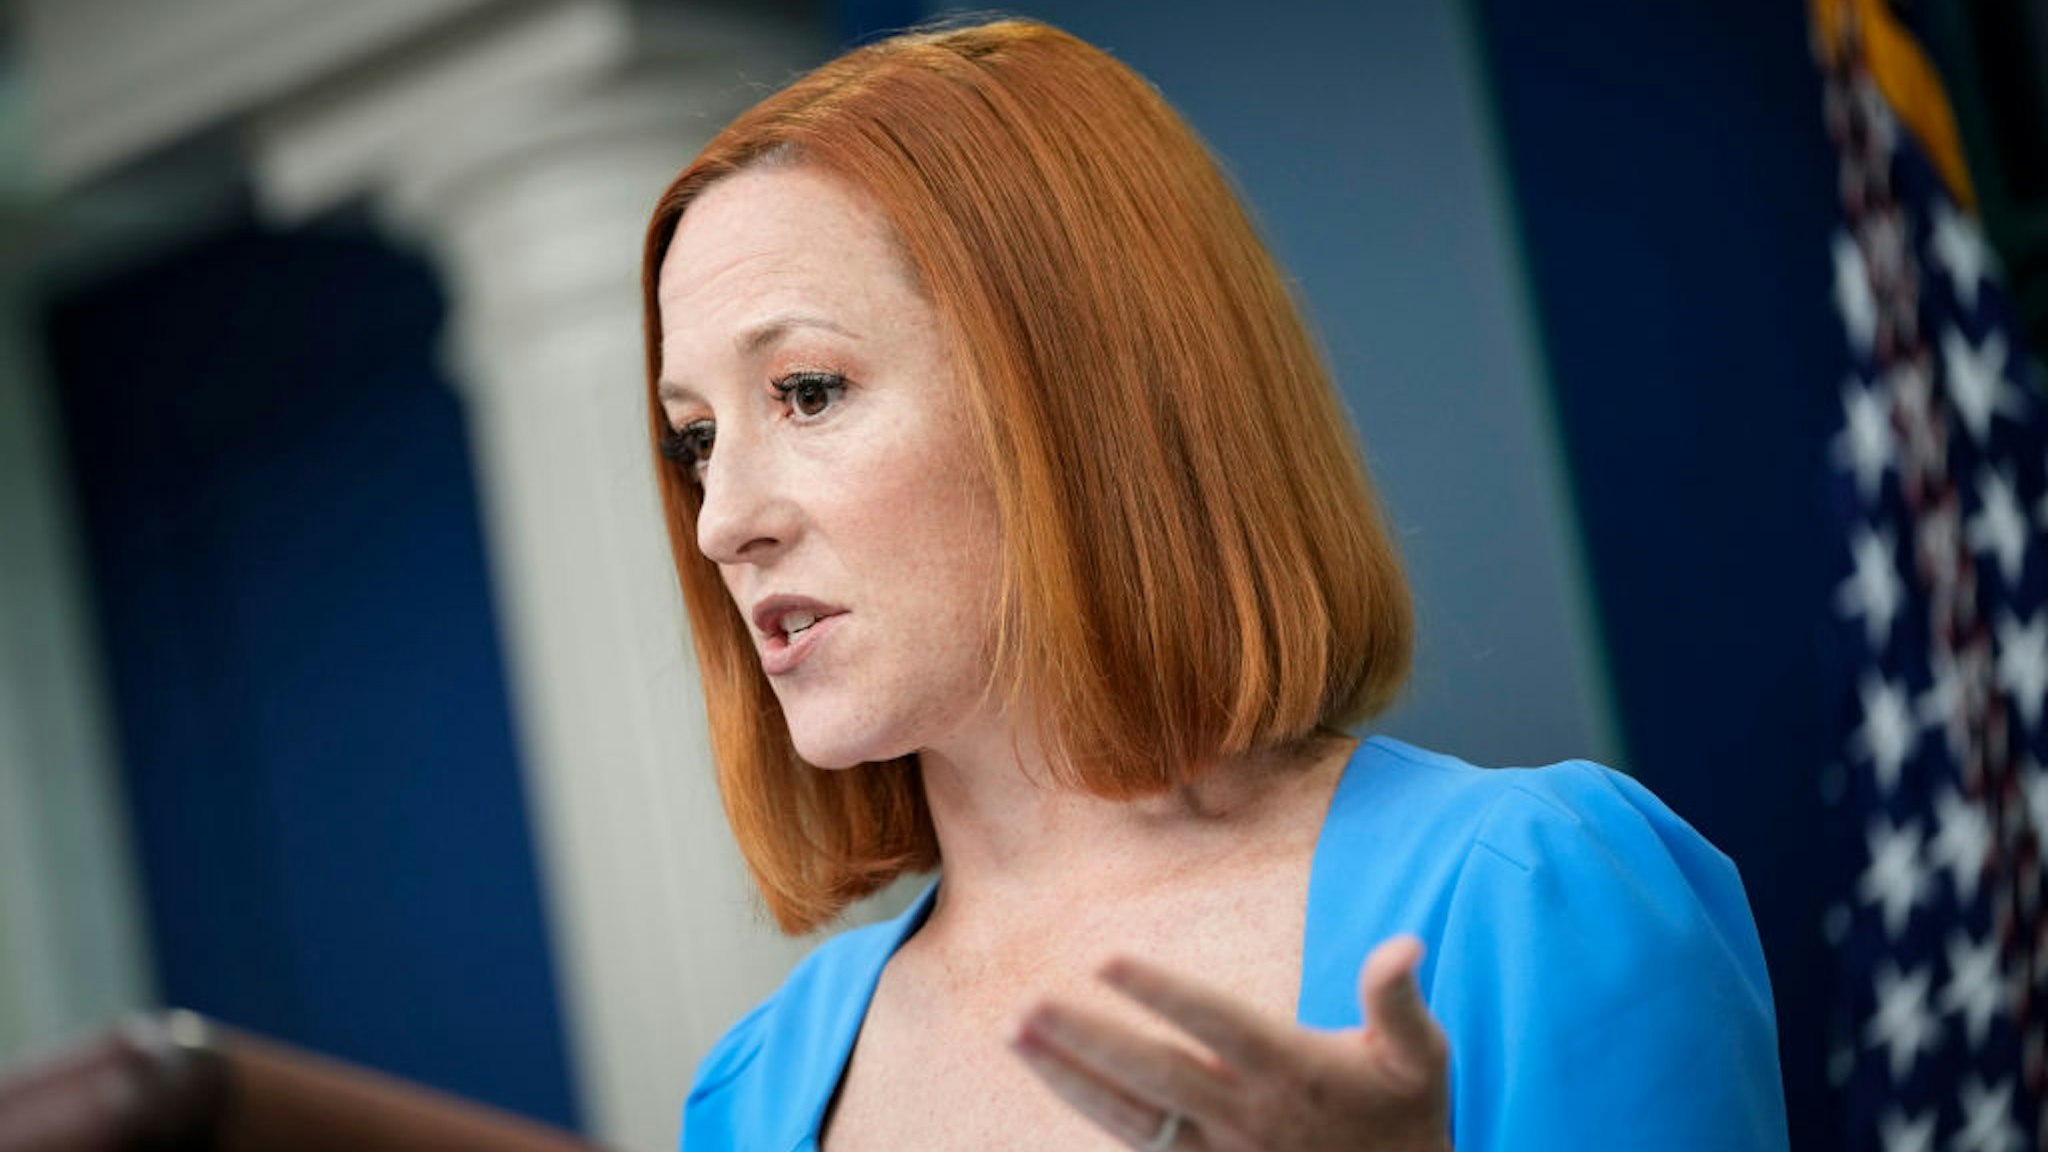 WASHINGTON, DC - MAY 12: White House Press Secretary Jen Psaki speaks during the daily press briefing at the White House on May 12, 2022 in Washington, DC. Psaki fielded several questions about the White Houses response to the recent baby formula shortage, which experts say is the worst shortage in decades. (Photo by Drew Angerer/Getty Images)